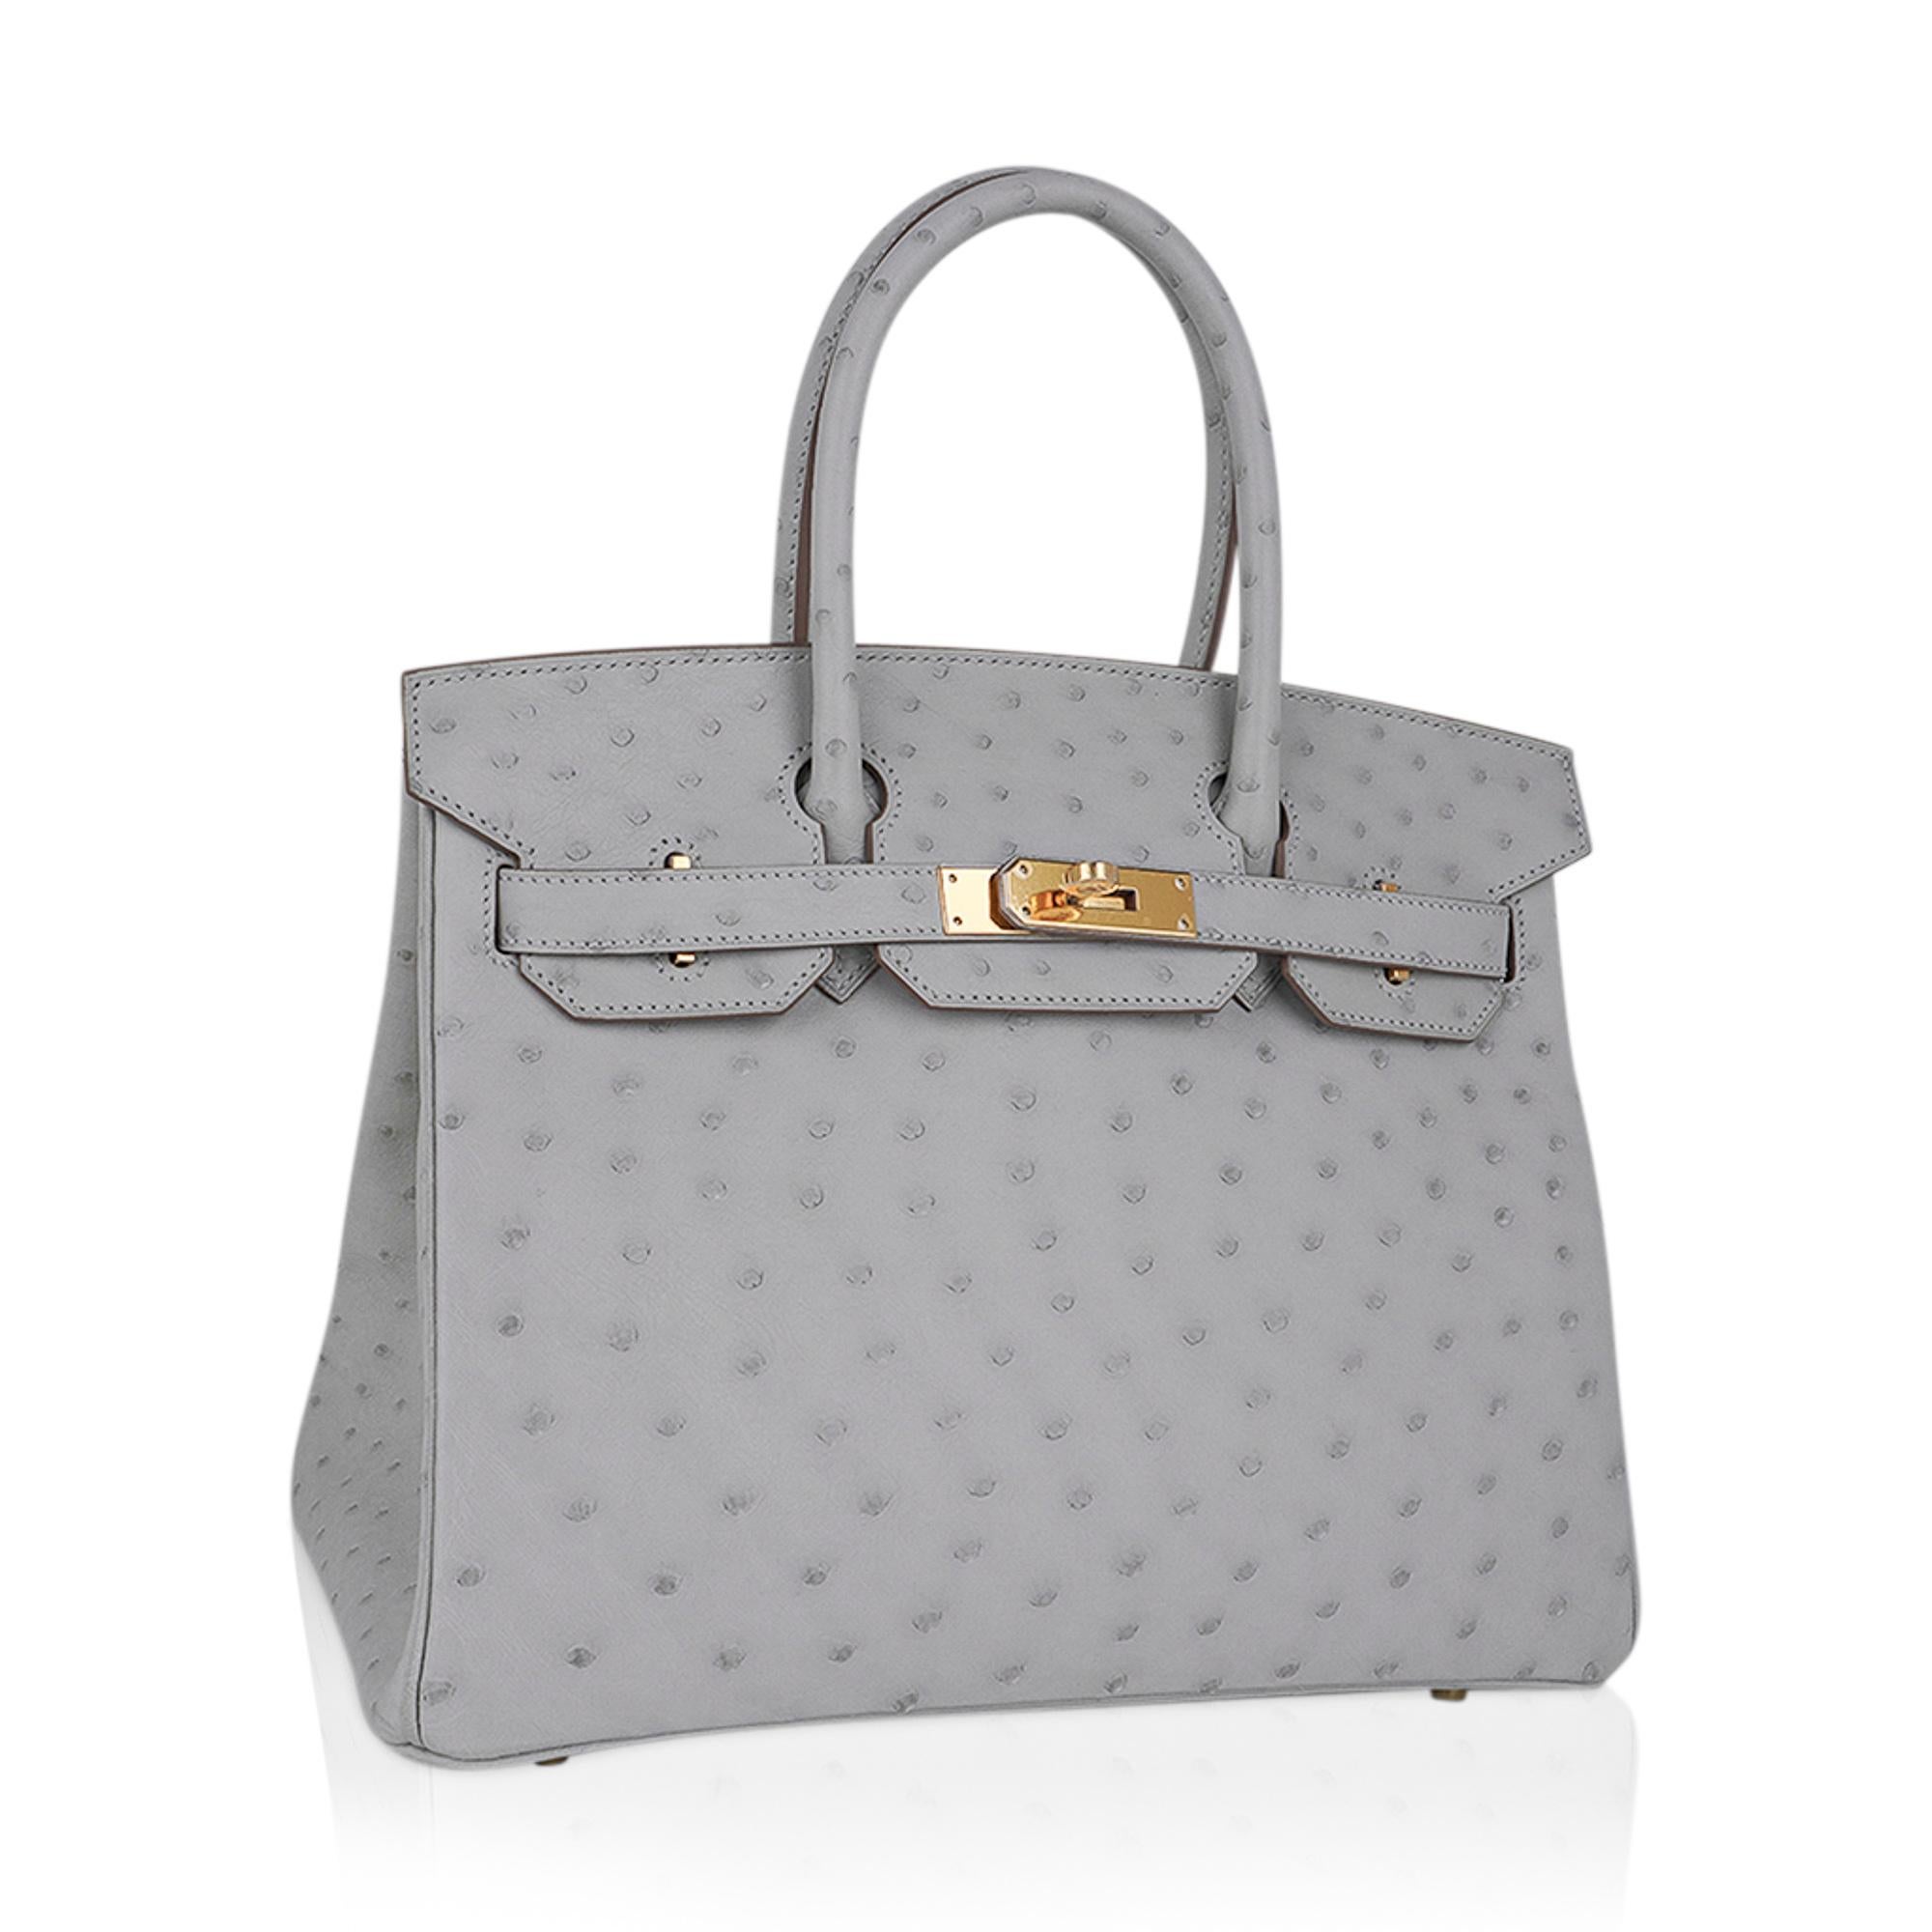 Mightychic offers a rare Hermes Birkin 30 bag featured in elegant Gris Perle.
Exquisite quills are subtle in this exquisite Hermes Birkin Gris Perle bag.
Timeless and elegant.
Ostrich is renowned for being extremely durable and wearing beautifully